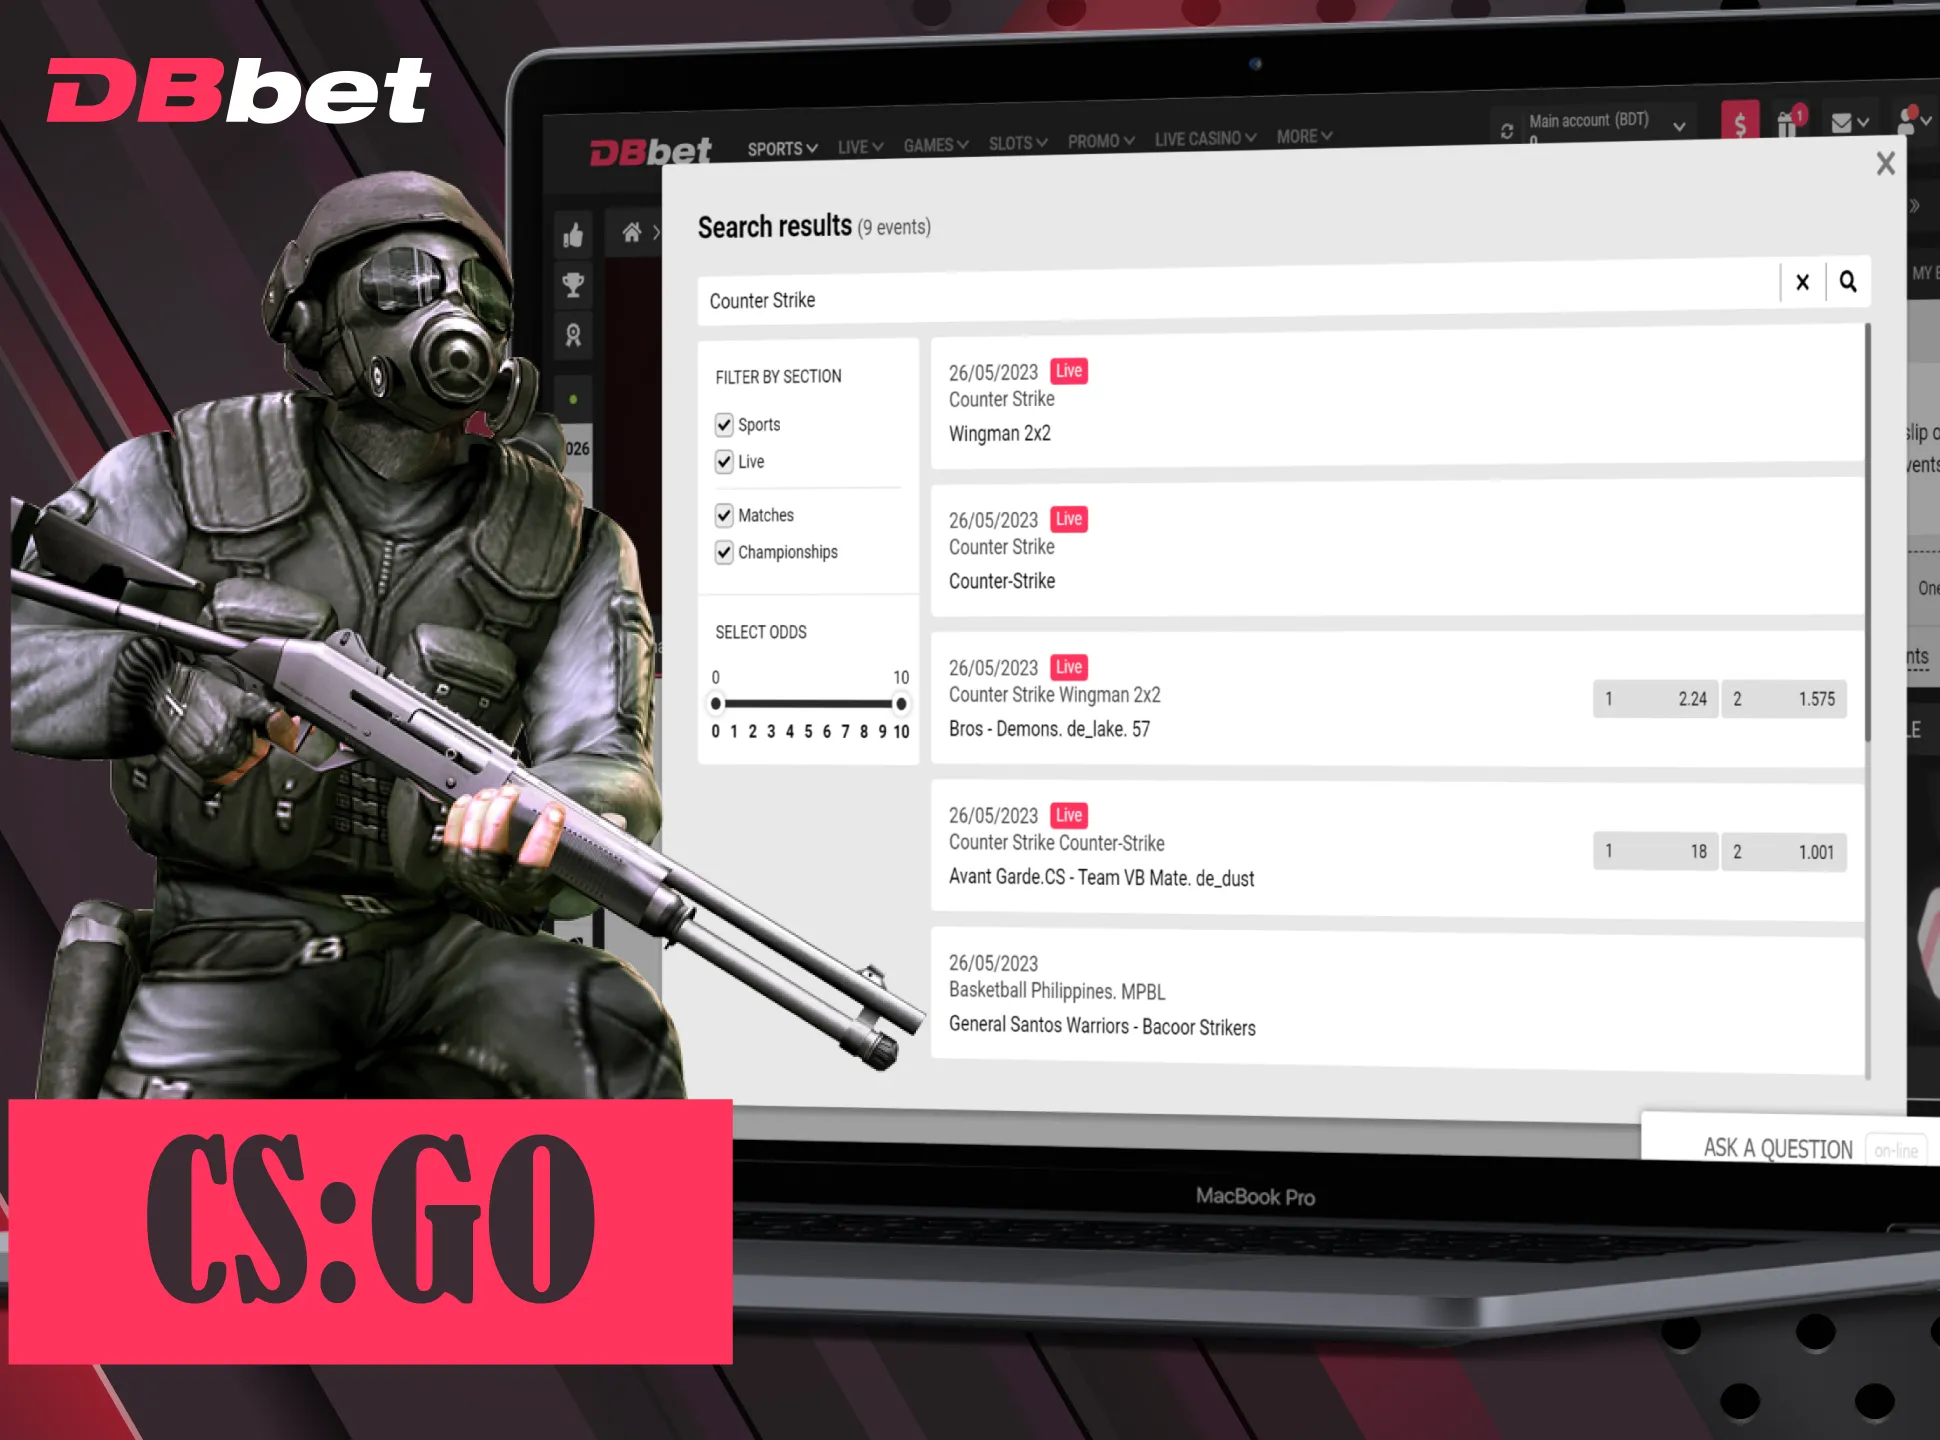 CS:GO is a great esport discipline for betting on at DBbet.